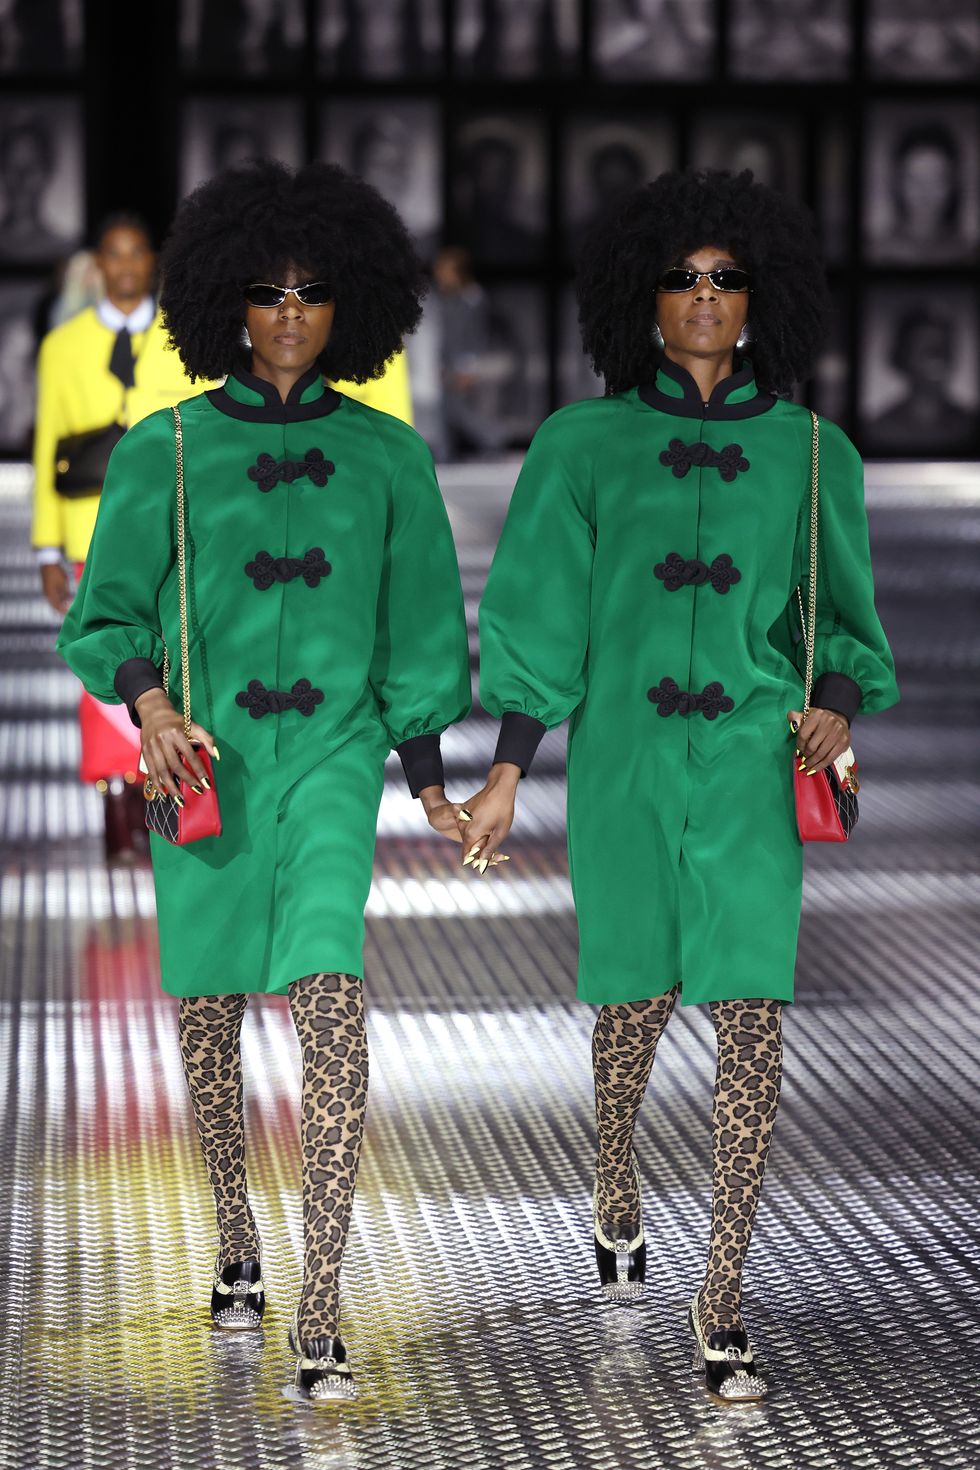 Gucci Cast 68 Sets of Identical Twins for Its Milan Show